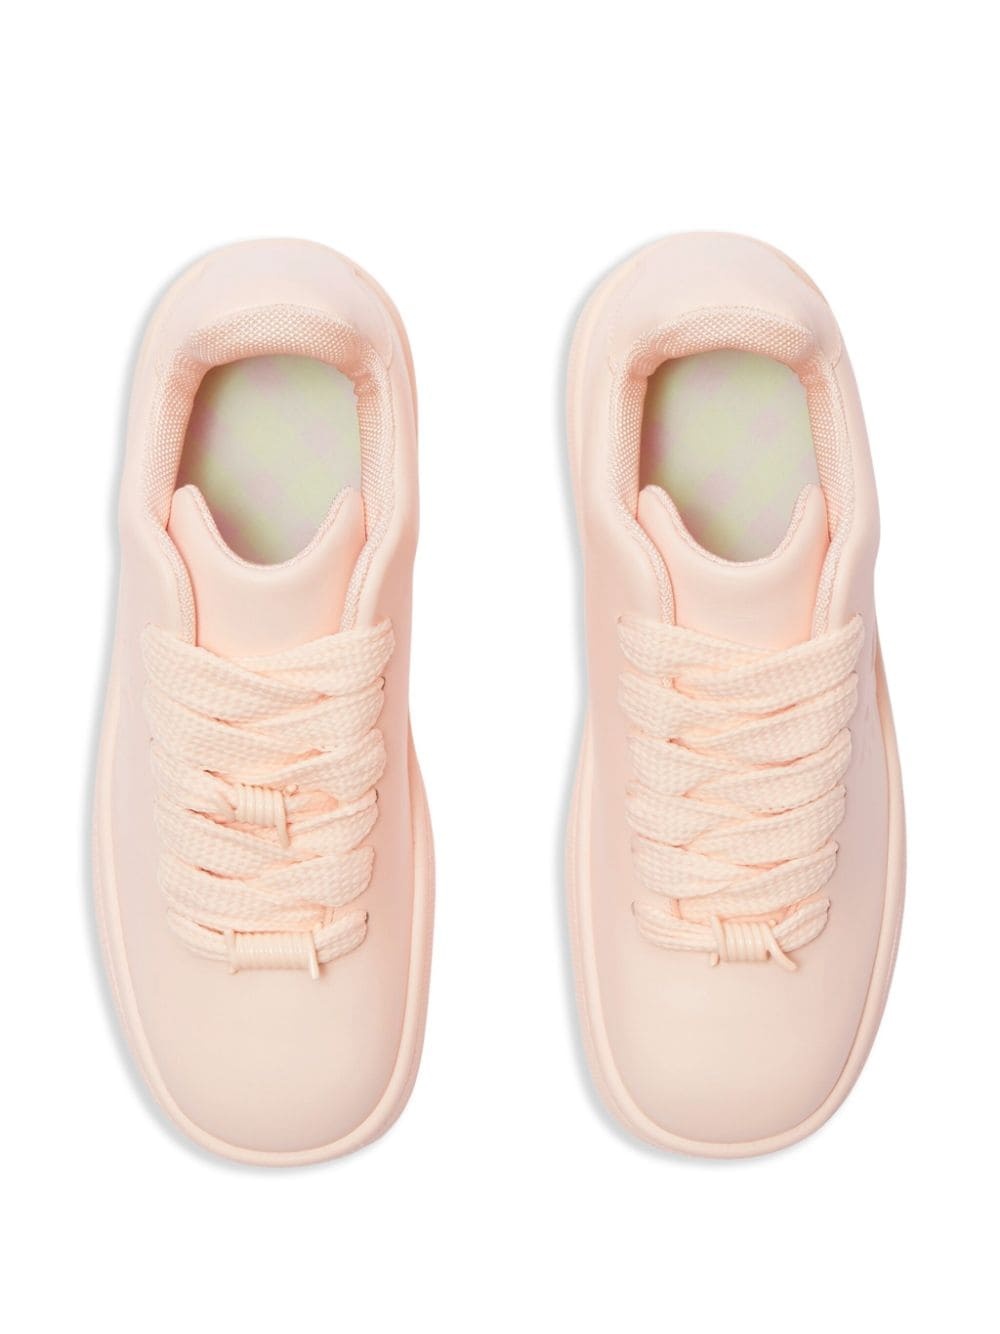 Box leather sneakers - 5